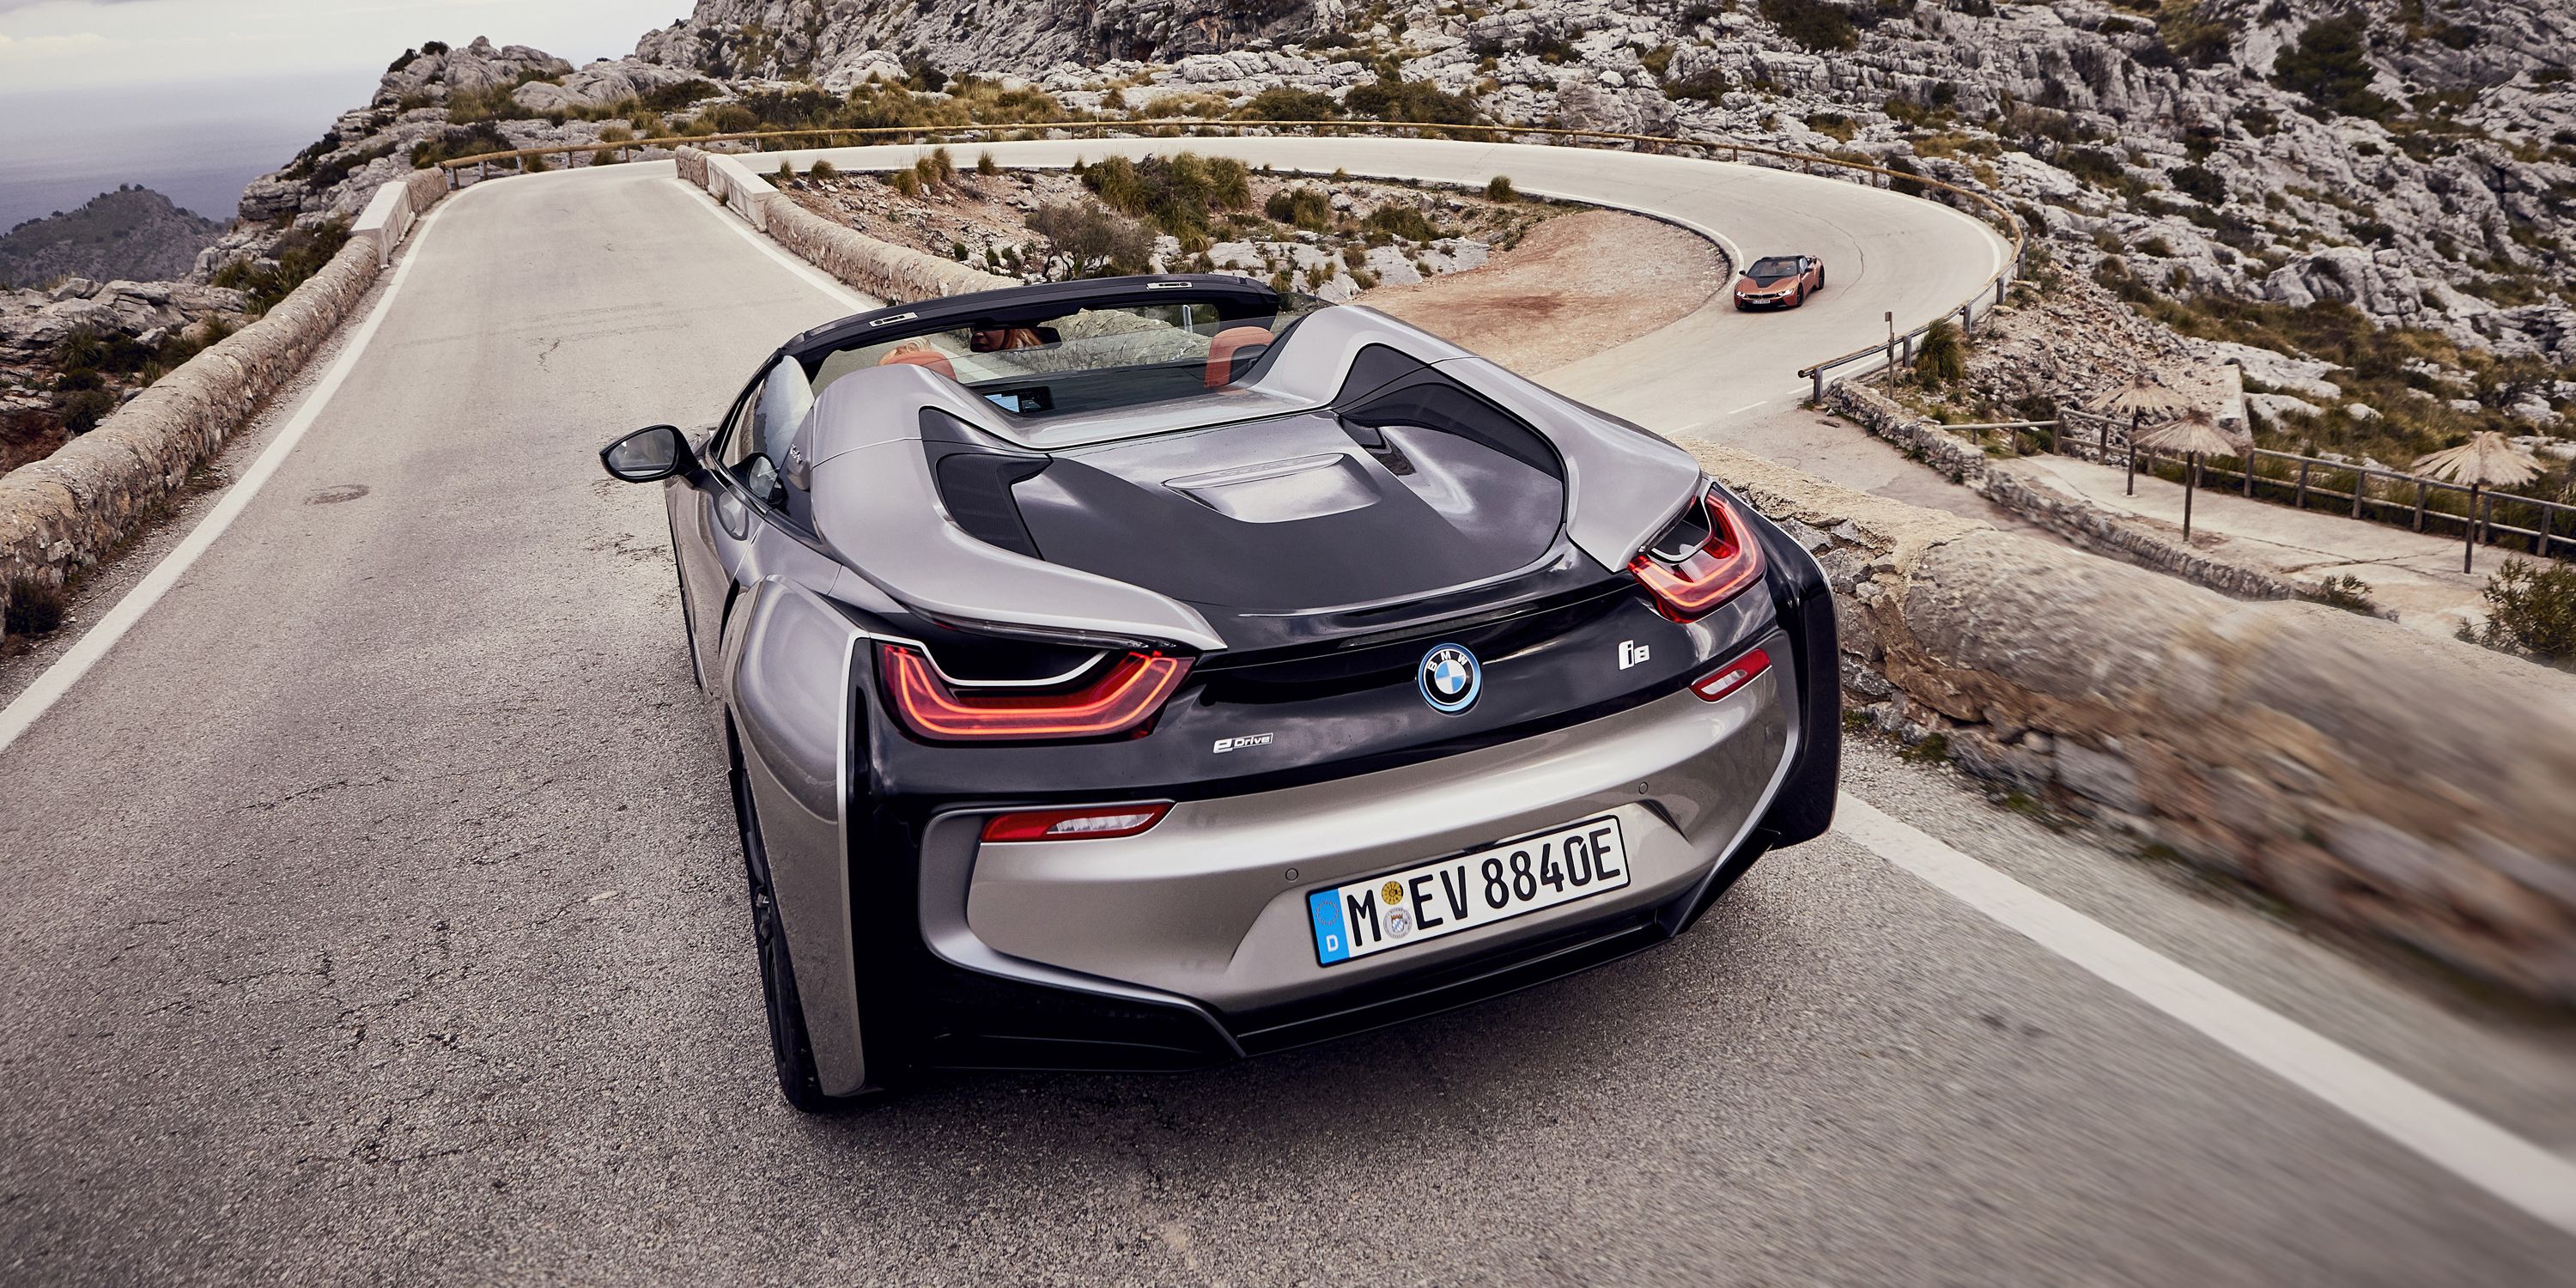 binding bestrating ~ kant The Most Impressive Part of the BMW i8 Roadster Is How It's Made